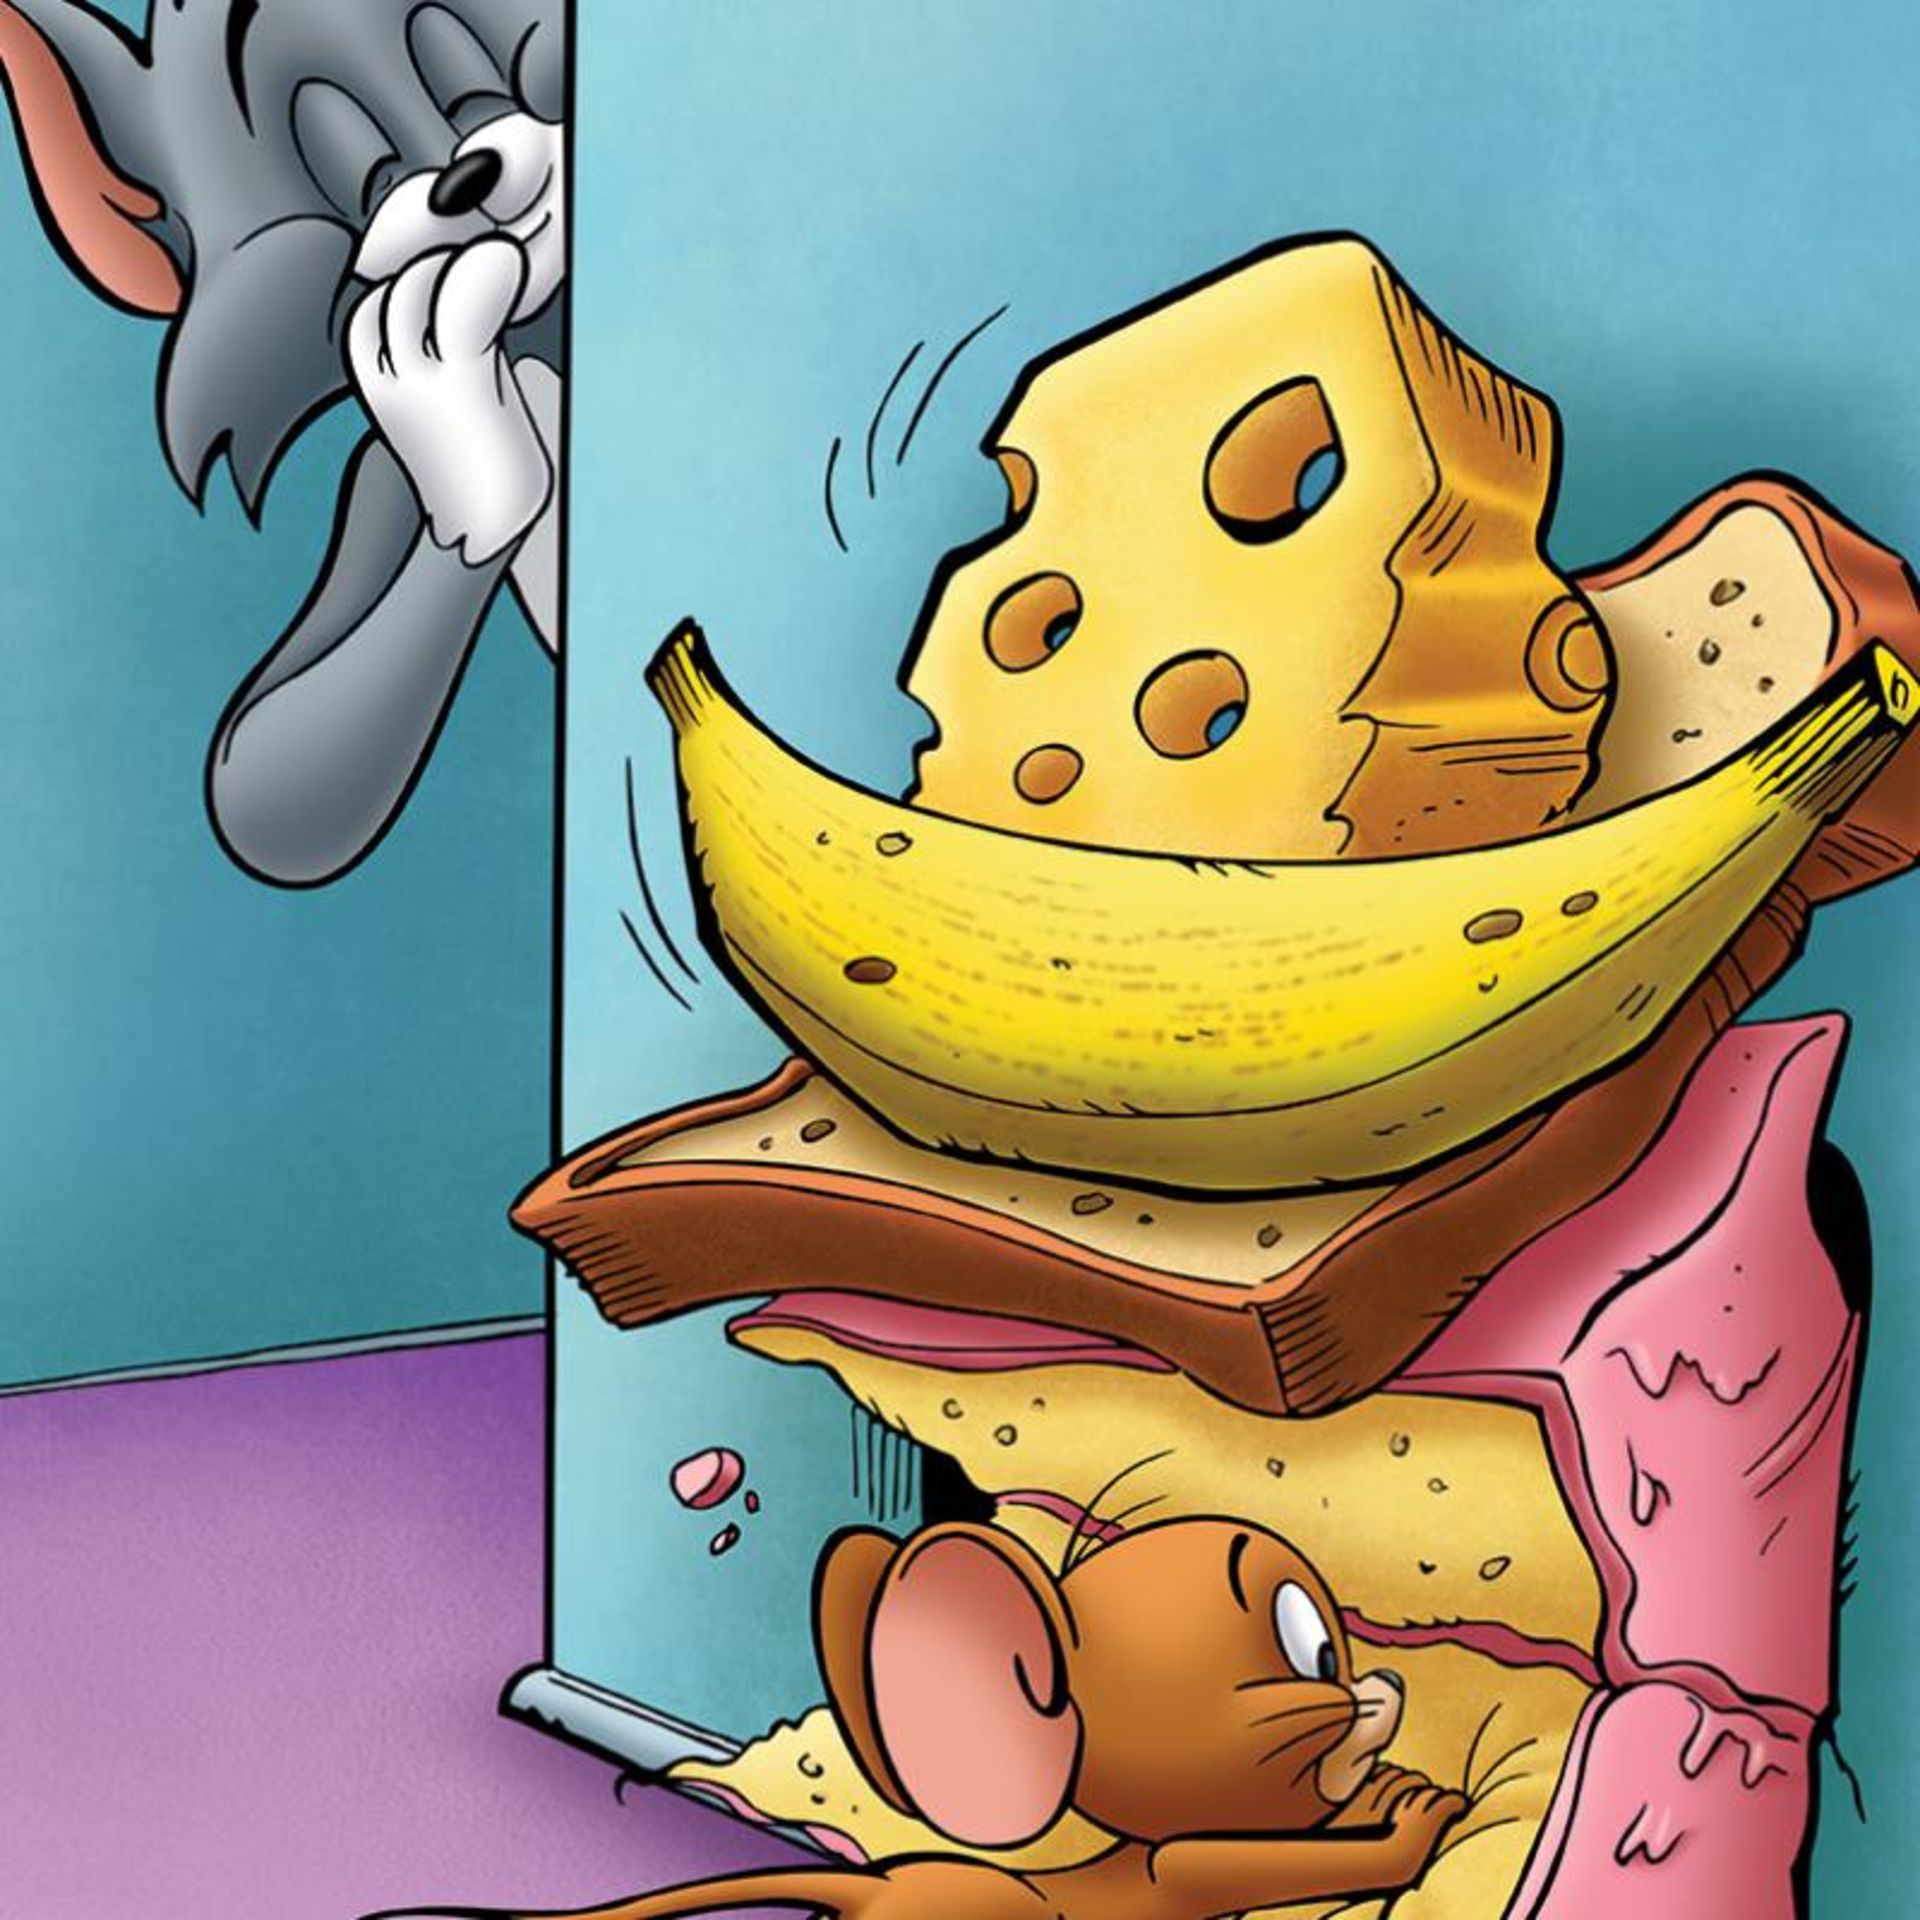 Tom and Jerry, Hidin the Cheese by Tom and Jerry - Image 2 of 2